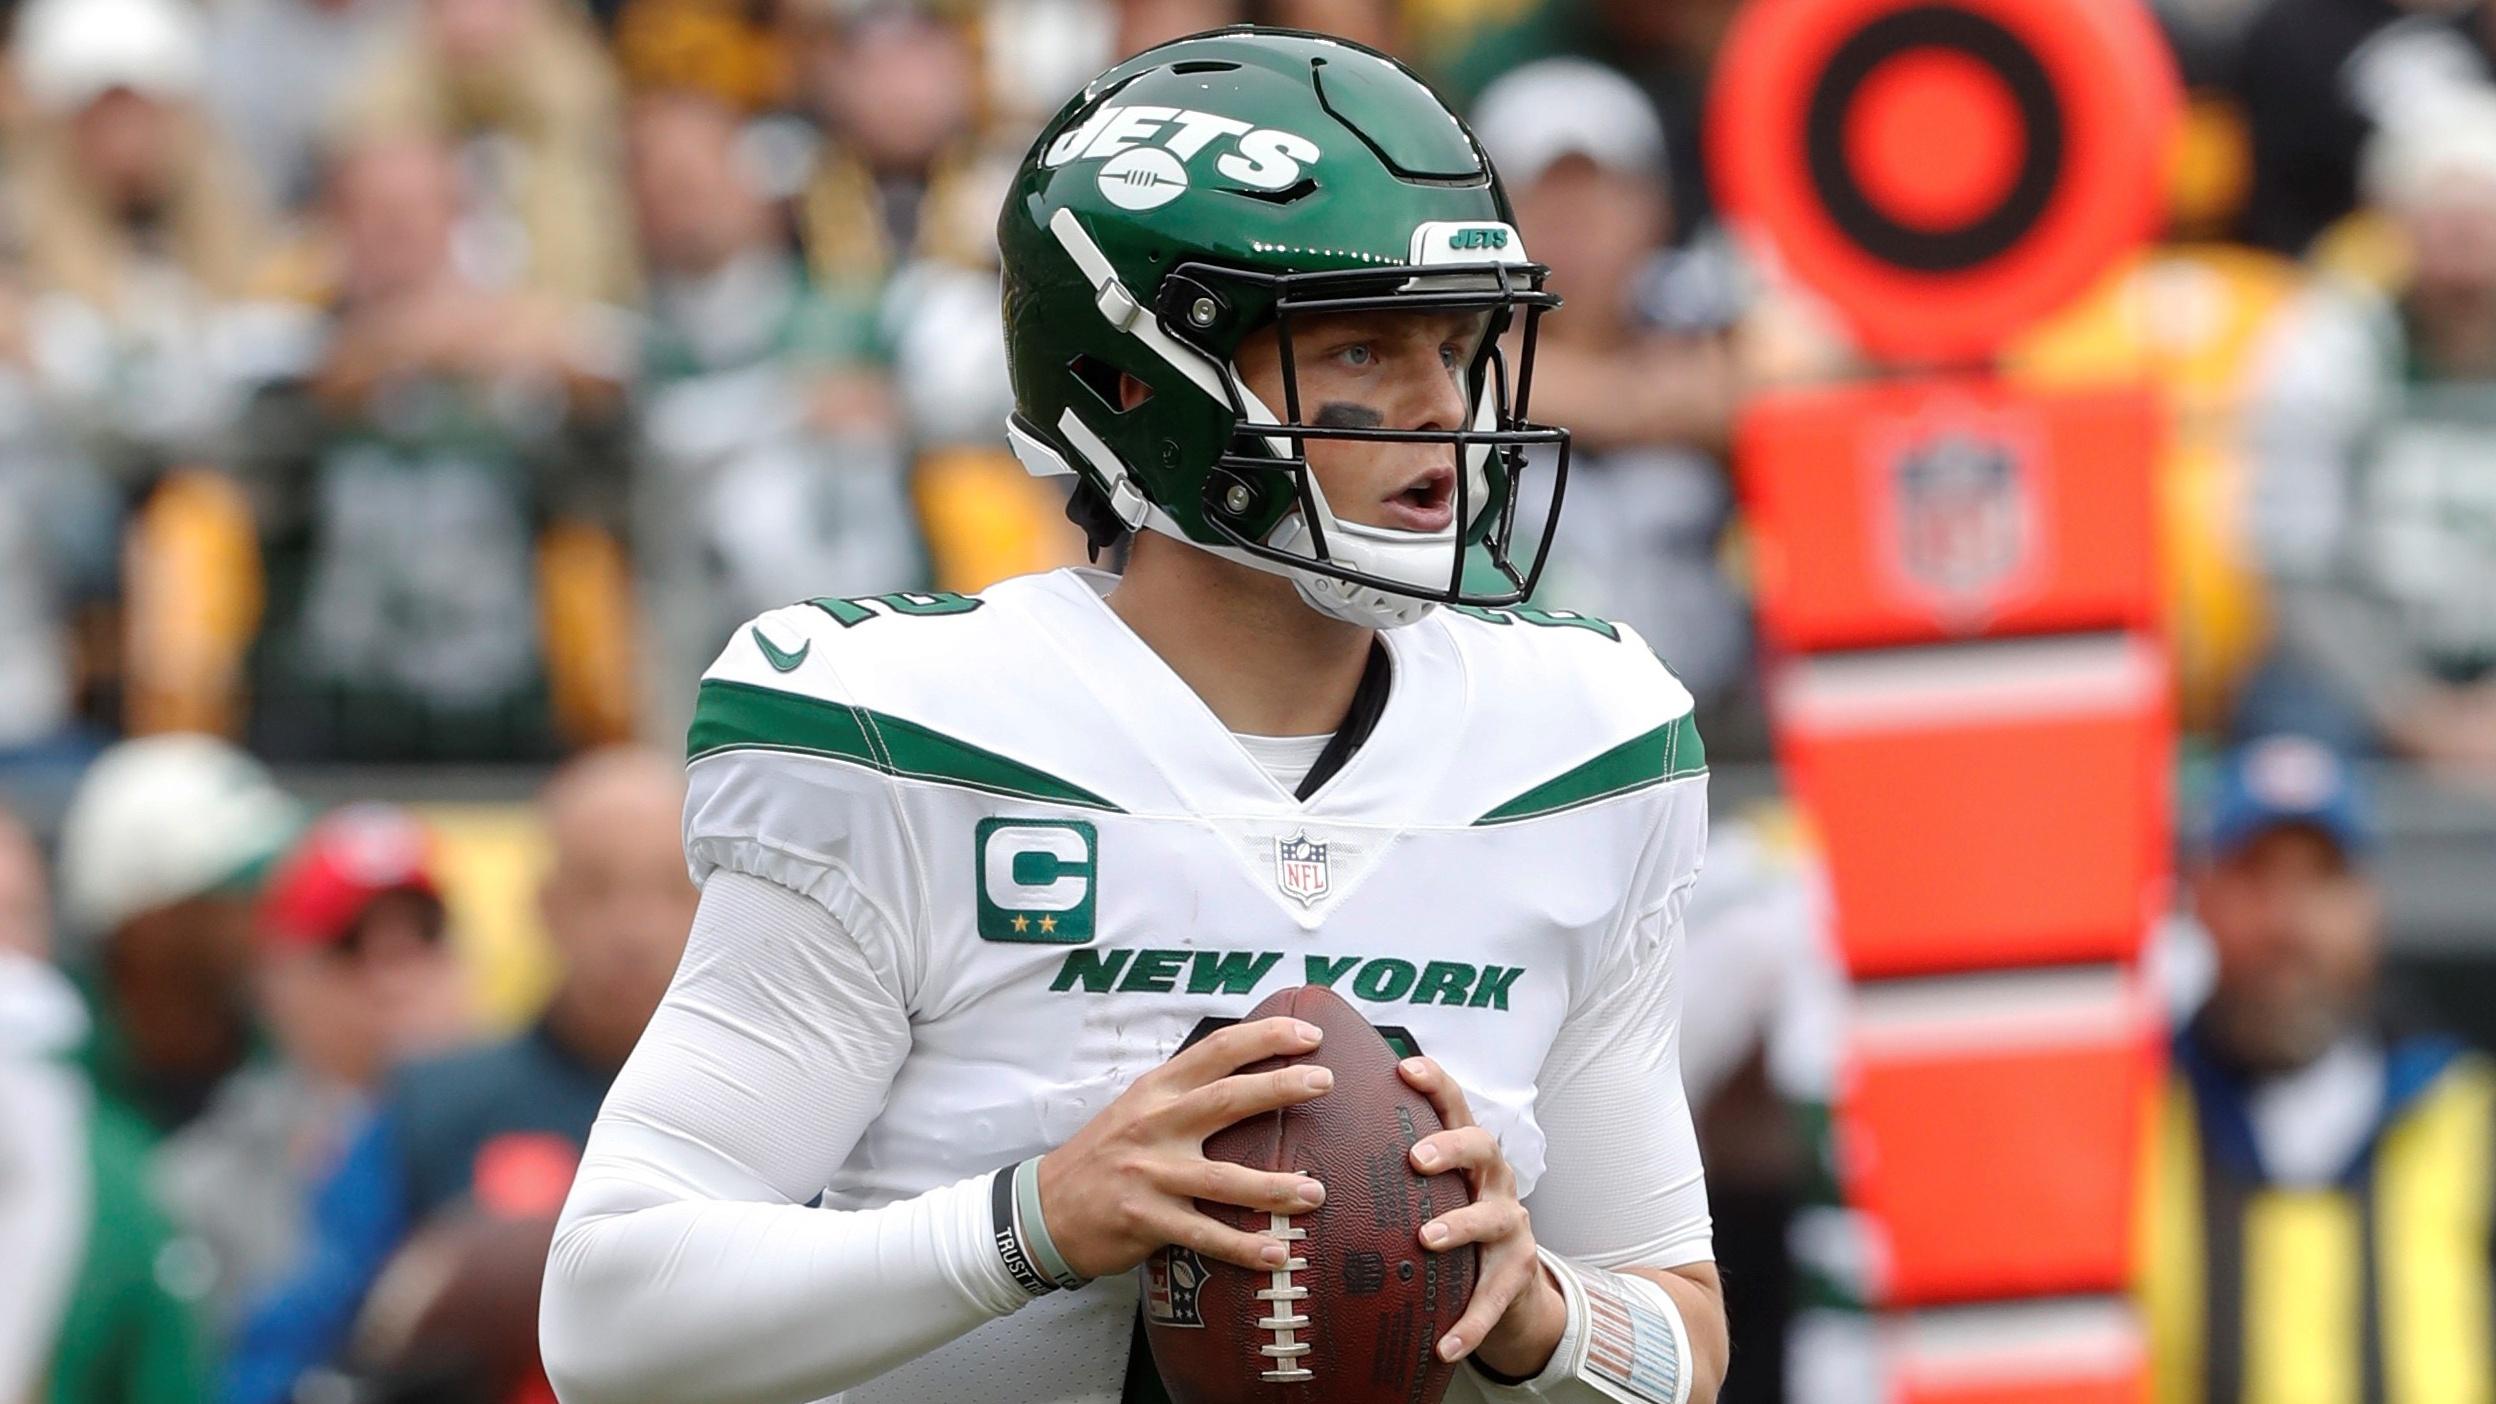 Oct 2, 2022; Pittsburgh, Pennsylvania, USA; New York Jets quarterback Zach Wilson (2) looks to pass against the Pittsburgh Steelers during the first quarter at Acrisure Stadium. Mandatory Credit: Charles LeClaire-USA TODAY Sports / © Charles LeClaire-USA TODAY Sports